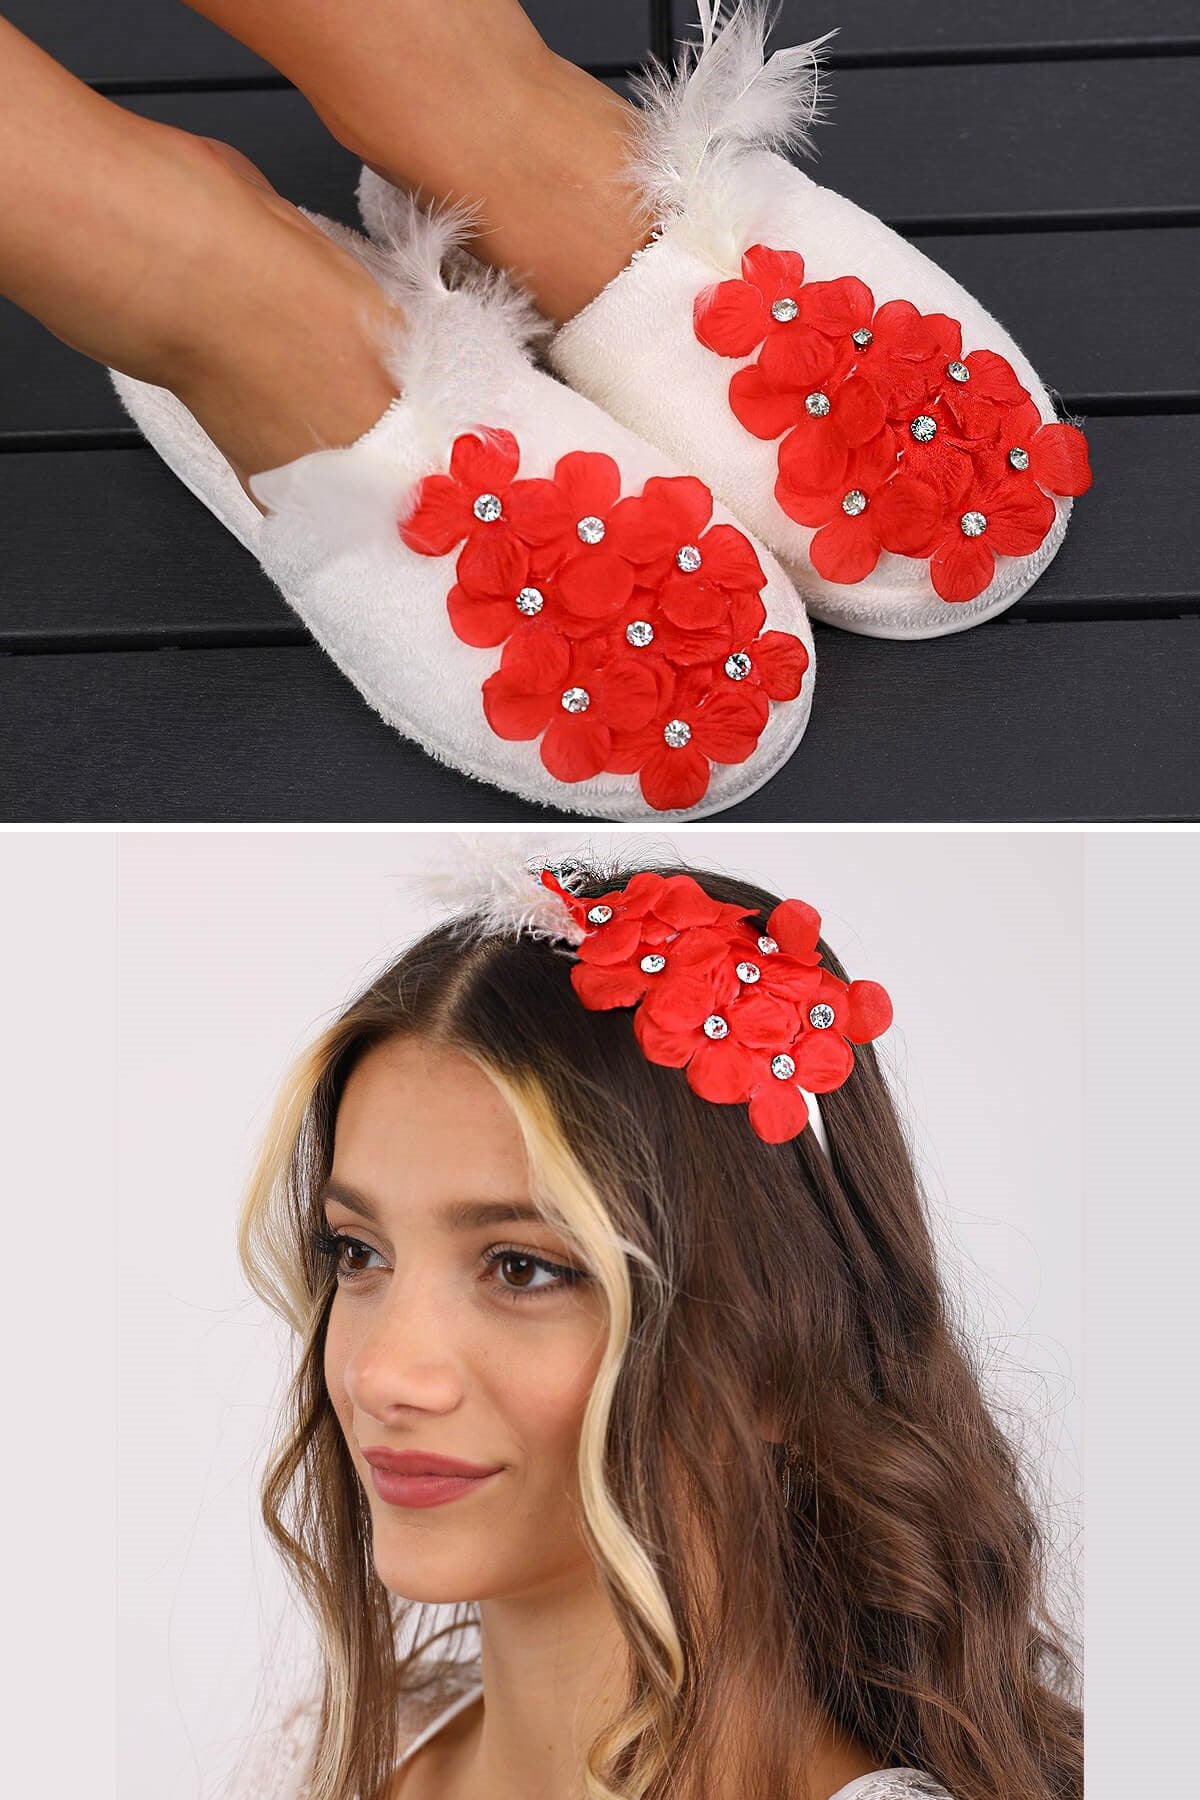 Shopymommy 757103 Violet Flowered Maternity Crown & Maternity Slippers Set Red